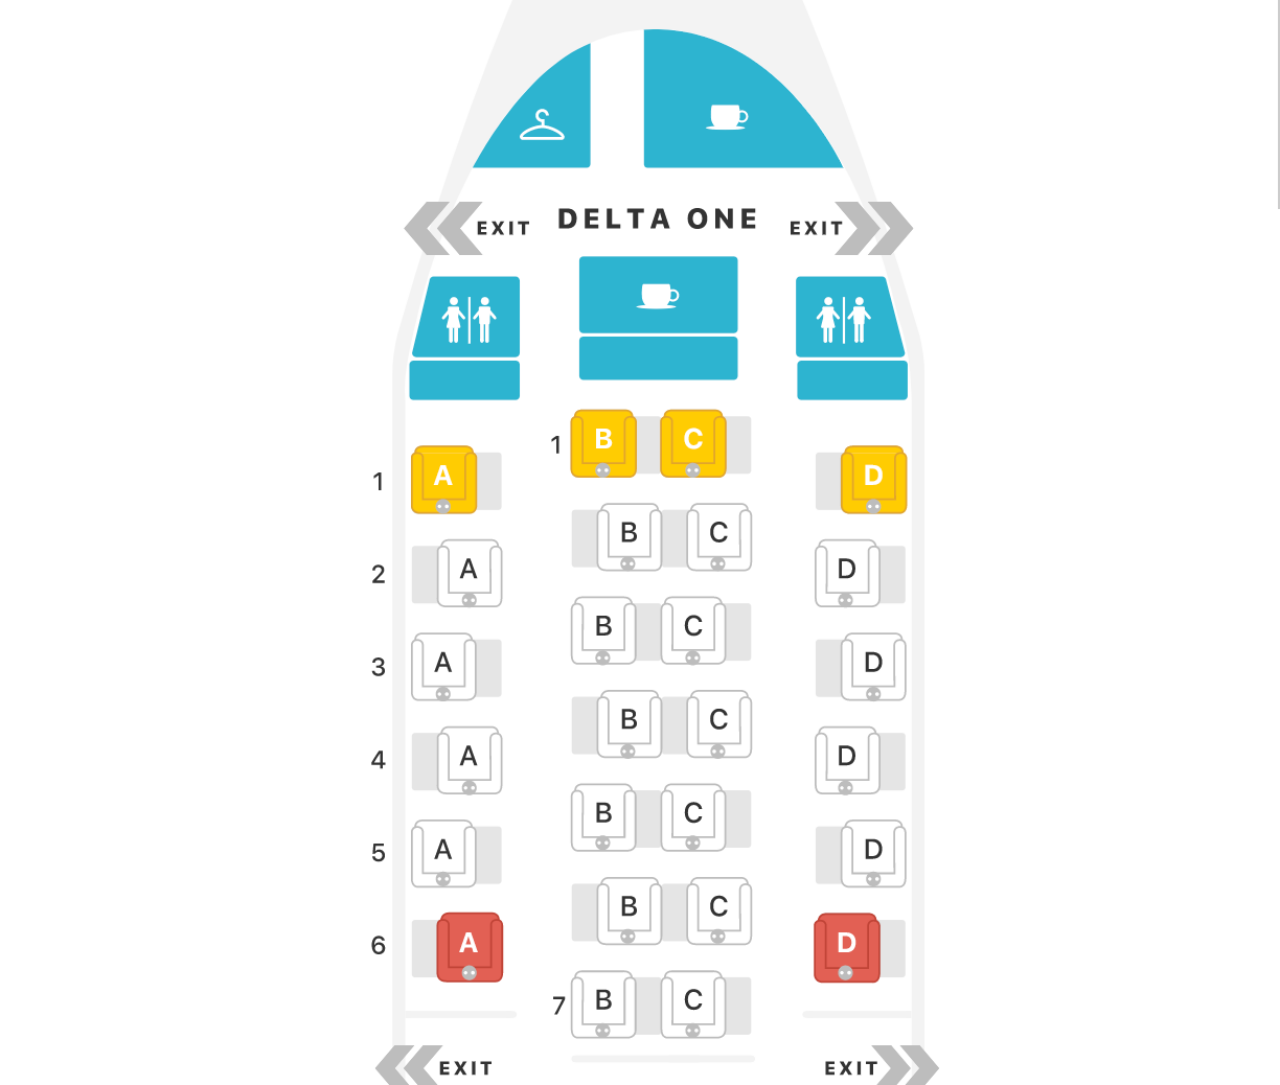 Delta One Seat Map, 767-300ER